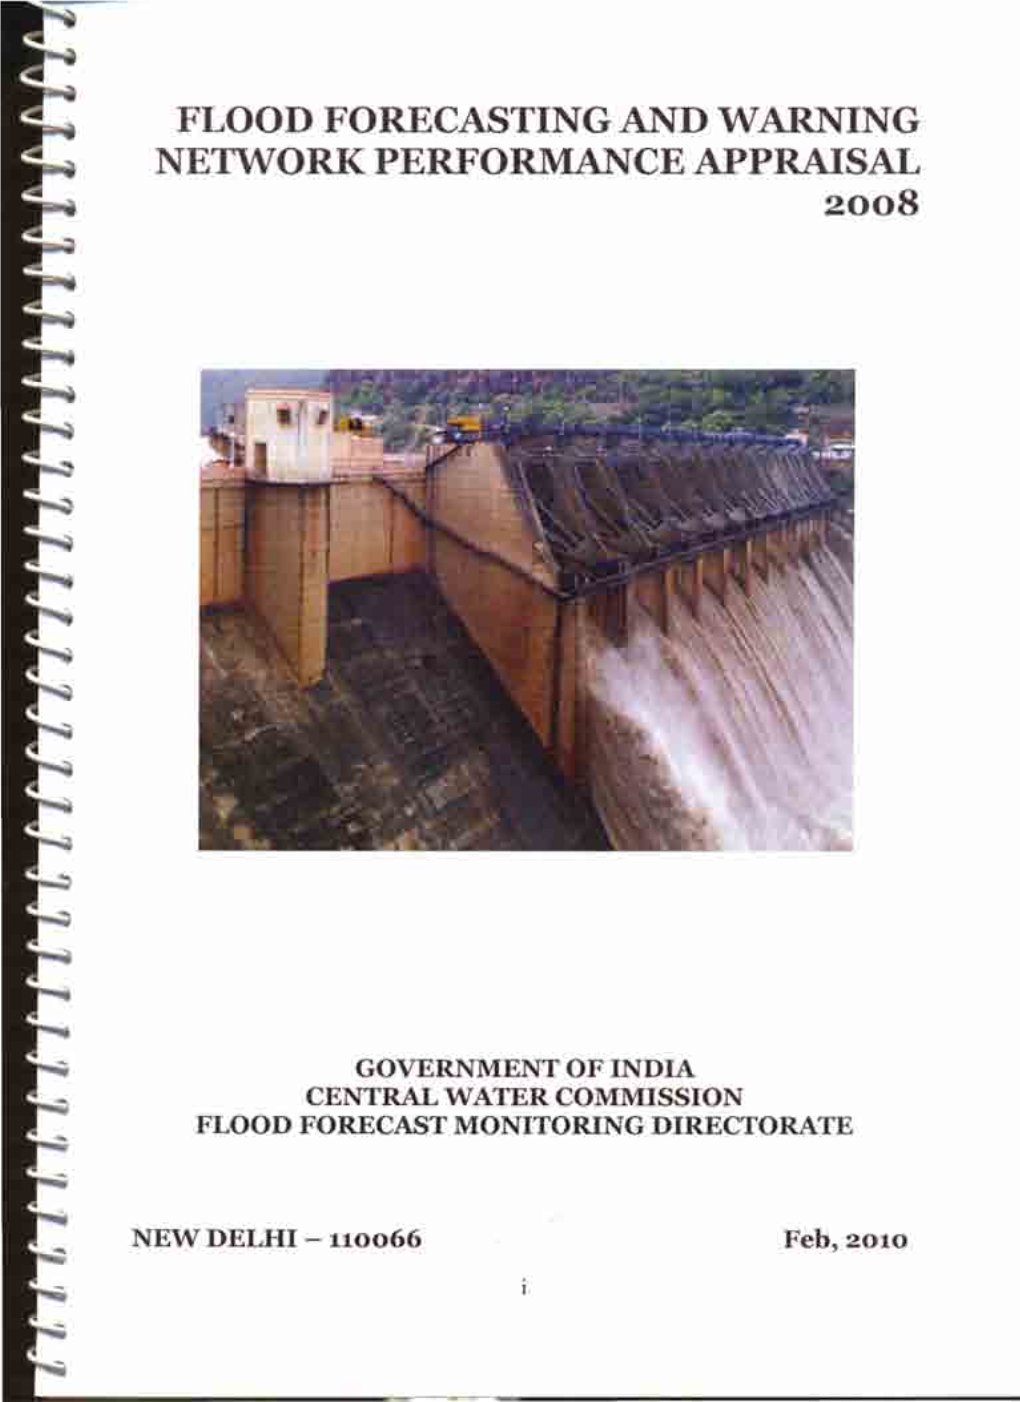 Flood Forecasting and Warning Networkperformanceapprmsal 2008